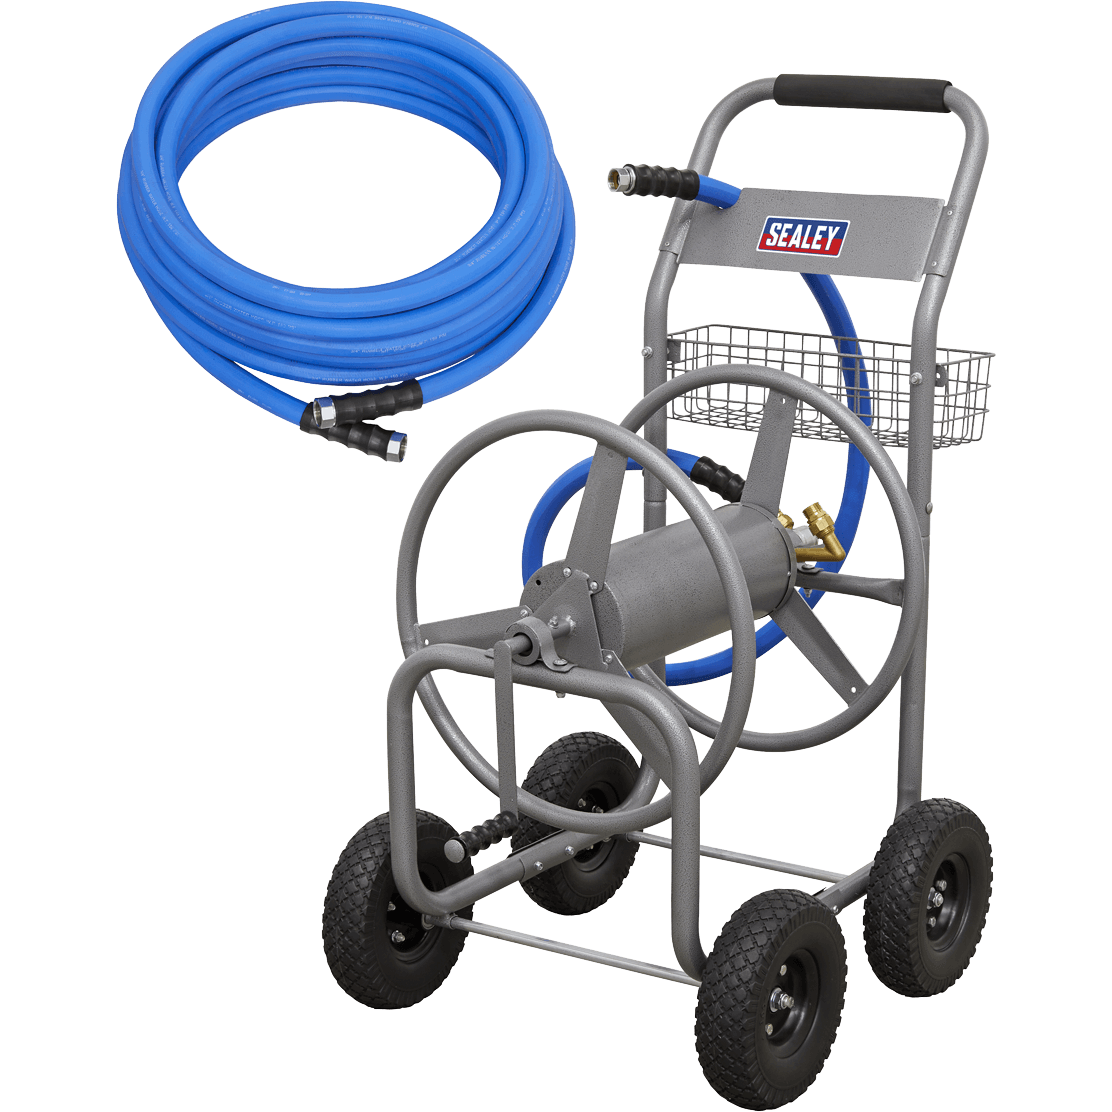 Sealey Hot and Cold Water Rubber Heavy Duty Hose Reel Cart 3/4" / 19mm 5m Blue